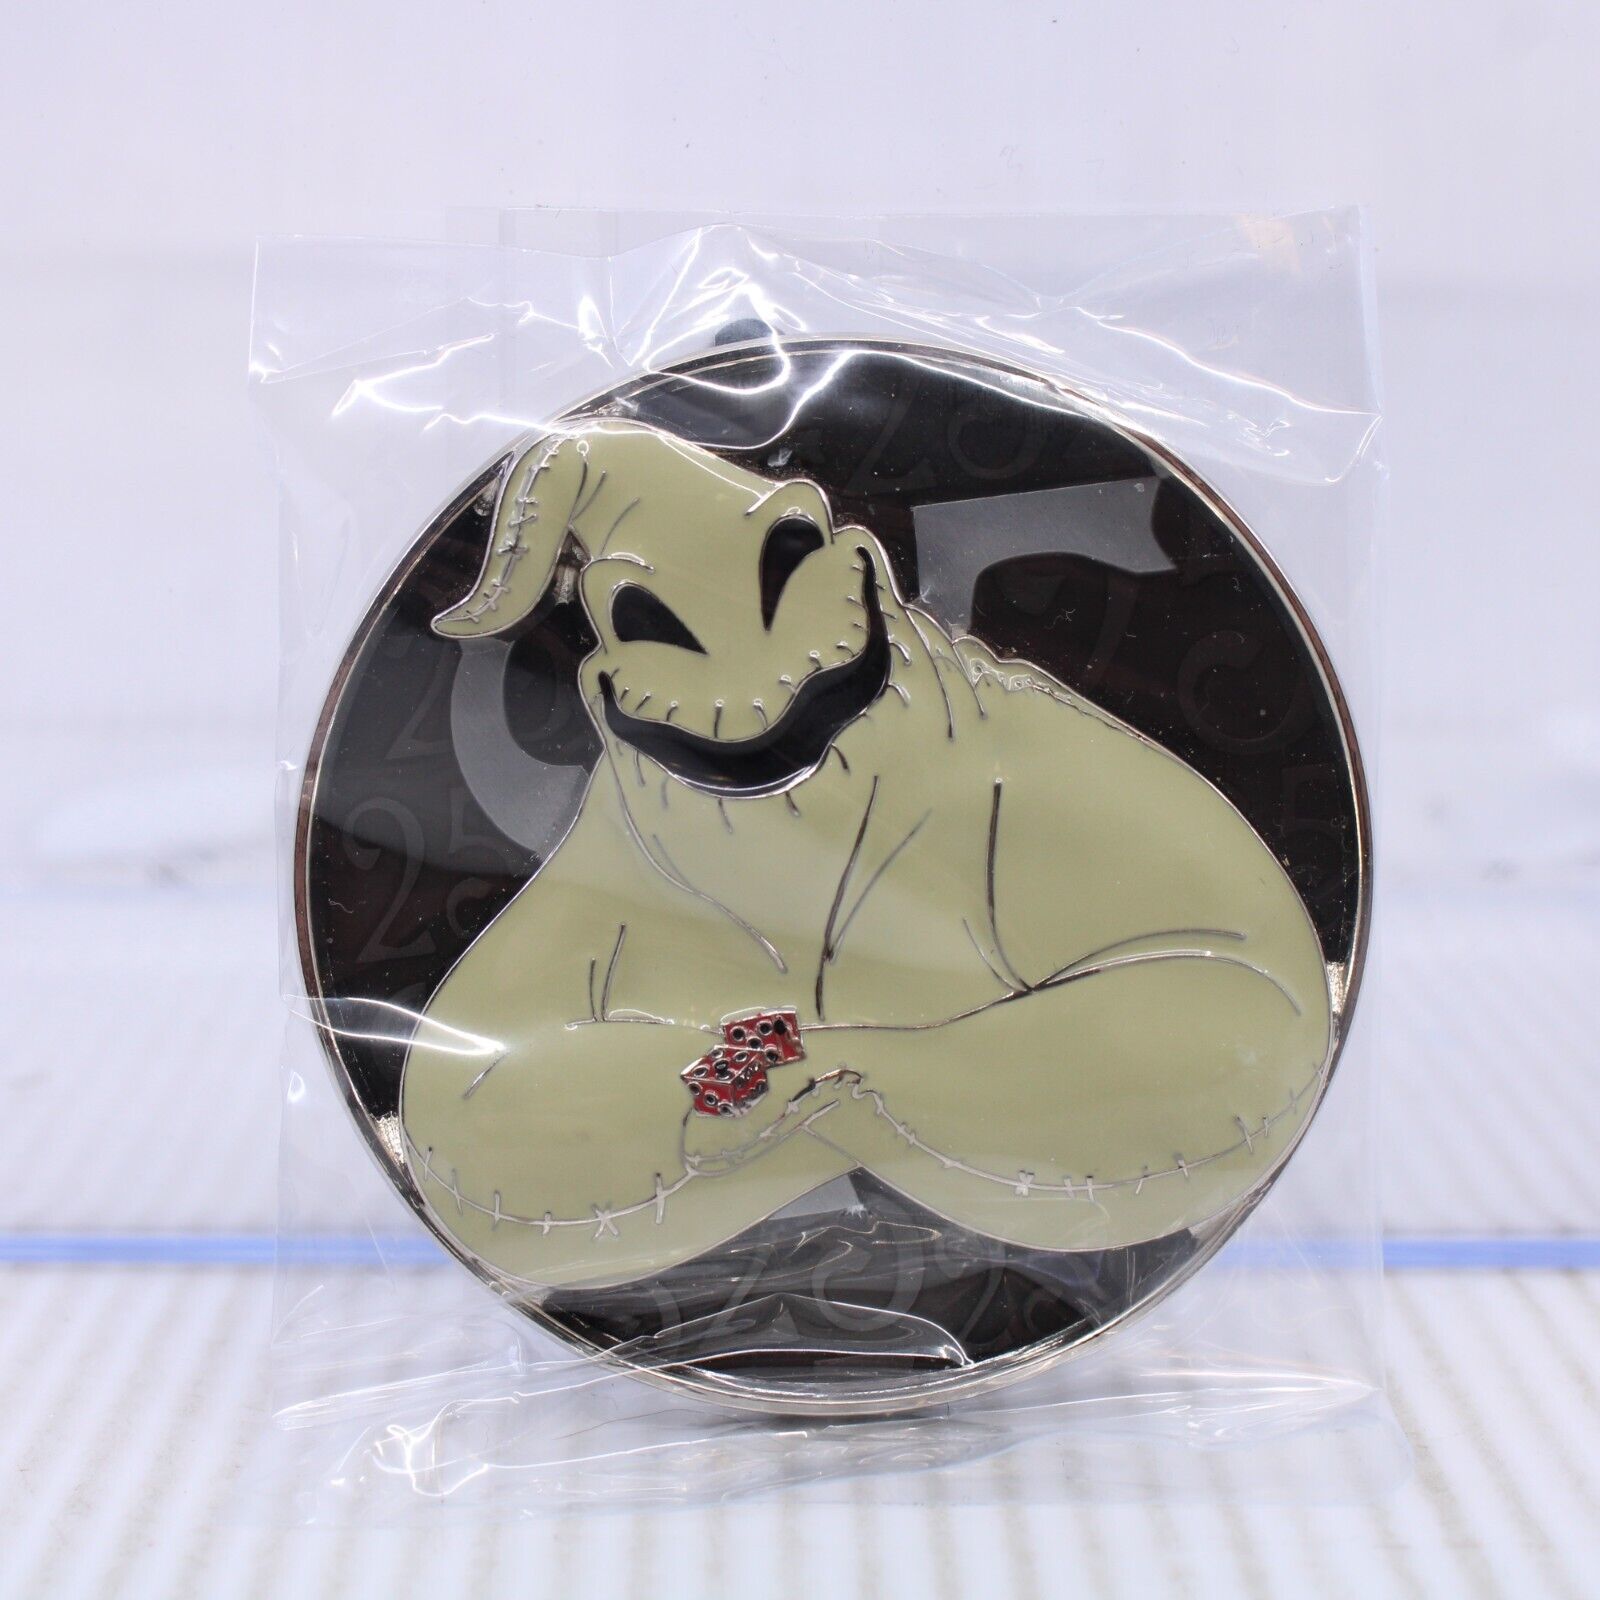 A4 Disney DSSH DSF LE Pin Nightmare NBC 25th Anniversary Oogie Boogie